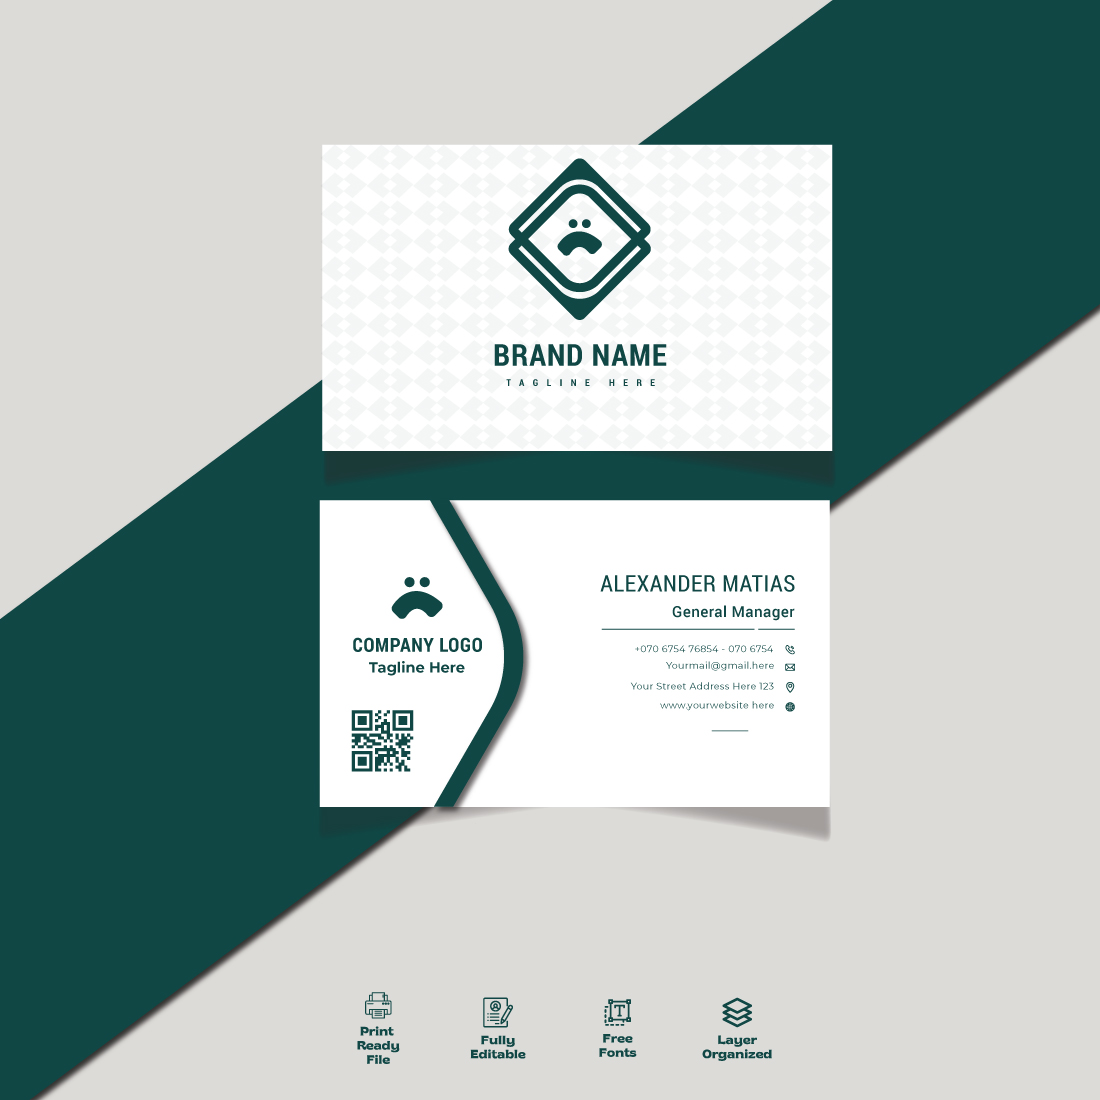 Minimal business card template layout Vector illustration Stationery design cover image.